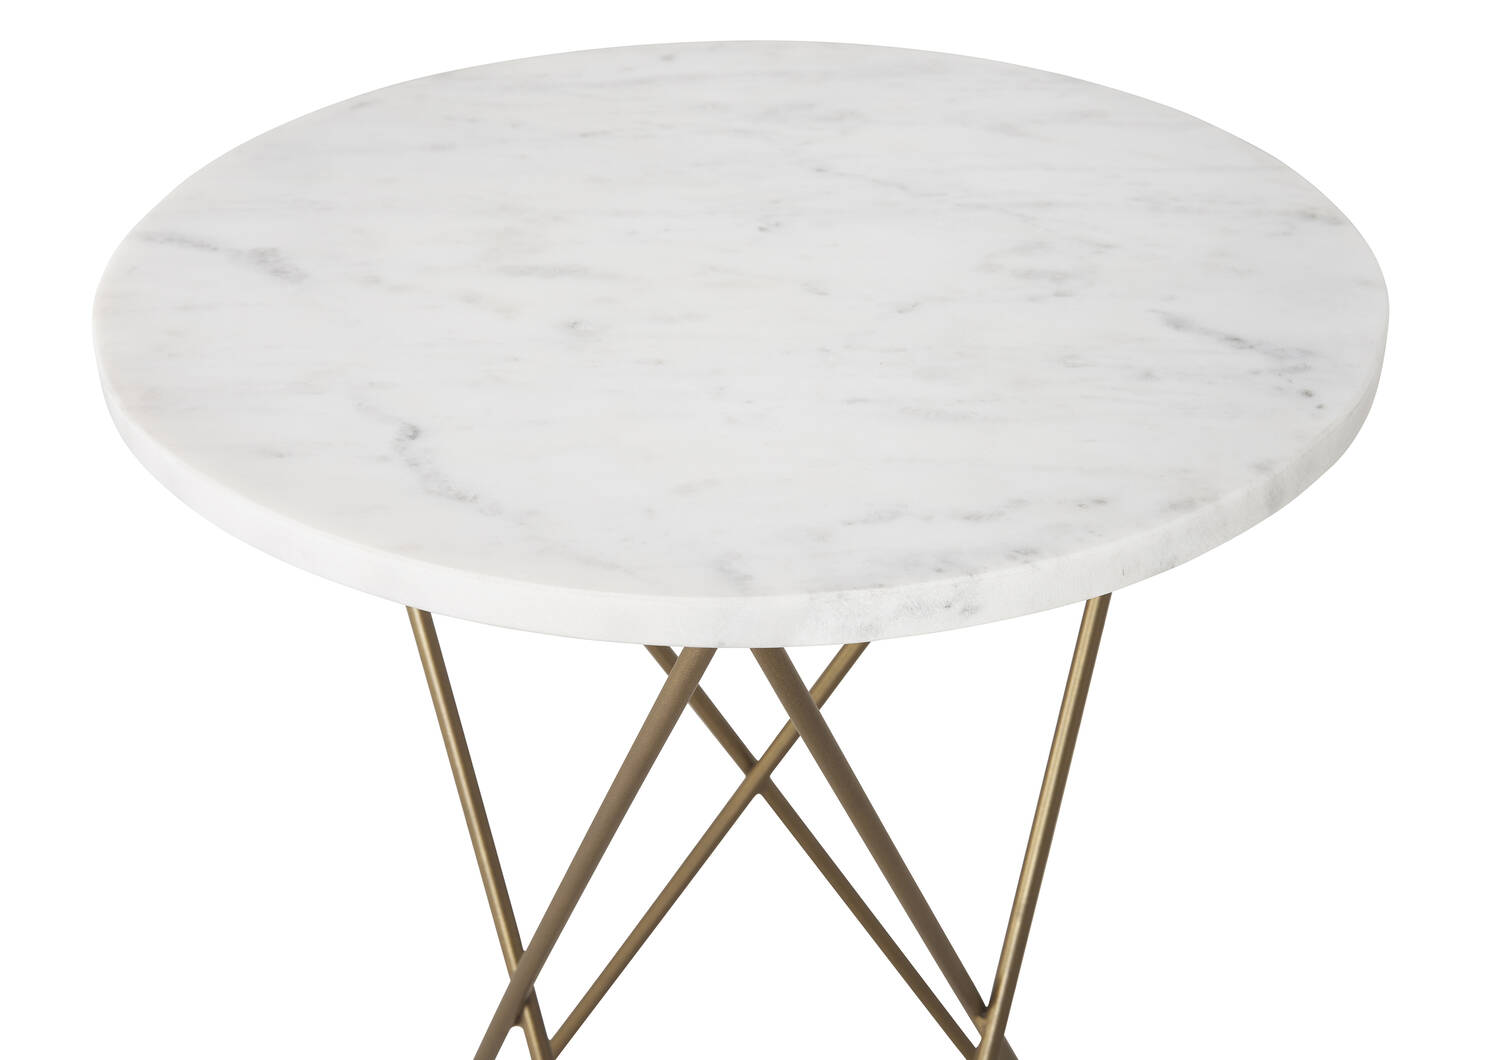 Ora Accent Table -Simba Brass